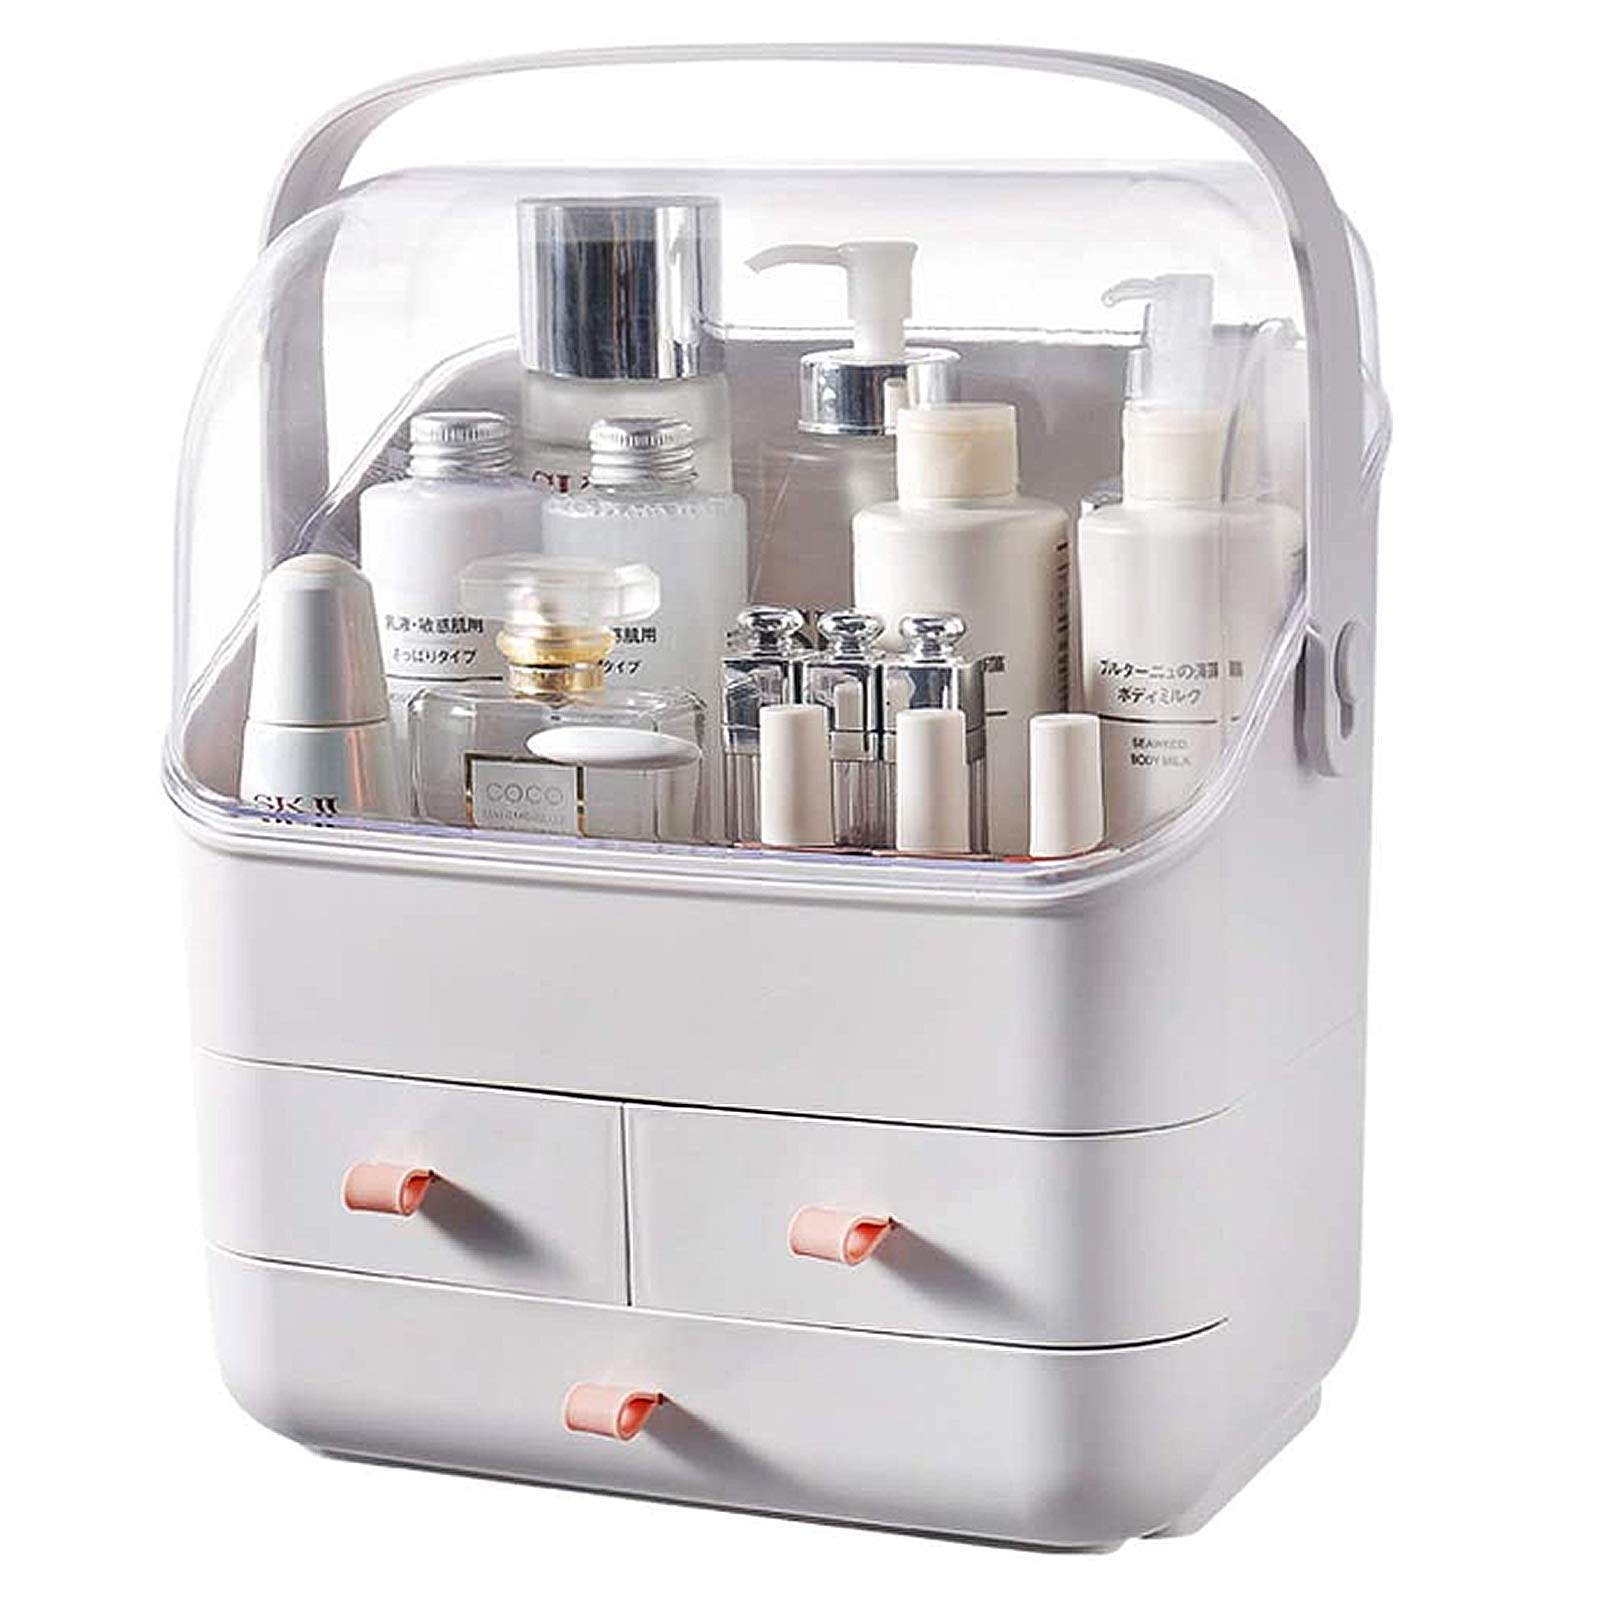 Cosmetic organizer, portable cosmetic storage box, waterproof and dustproof display box, jewelry hairpin storage rack, suitable for bathroom cabine...